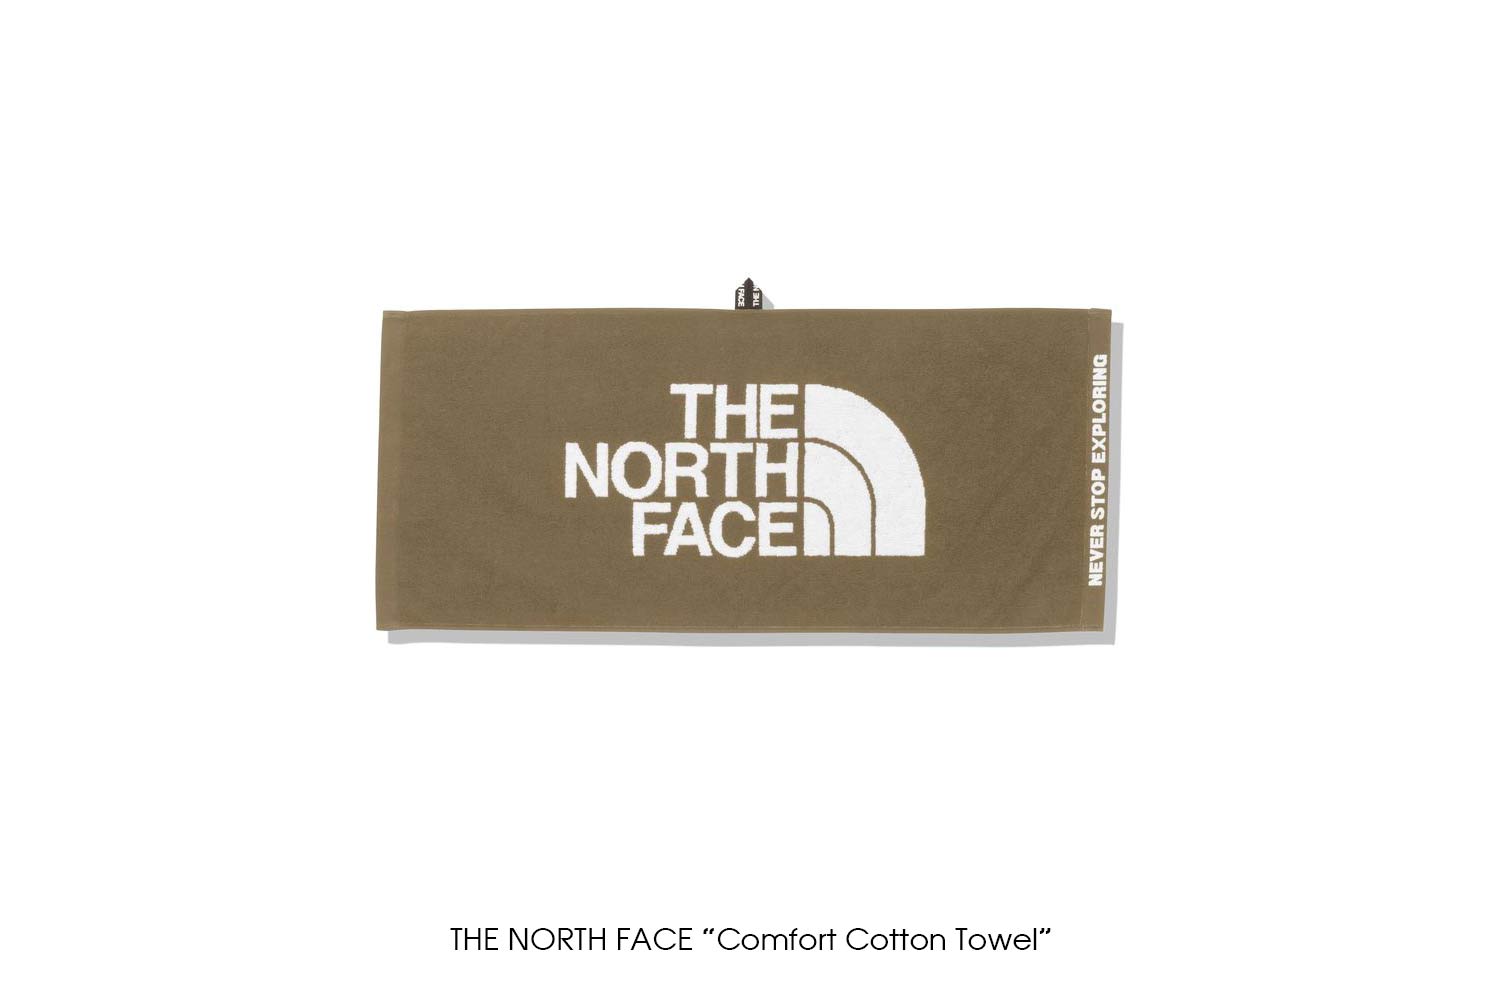 THE NORTH FACE "Comfort Cotton Towel"